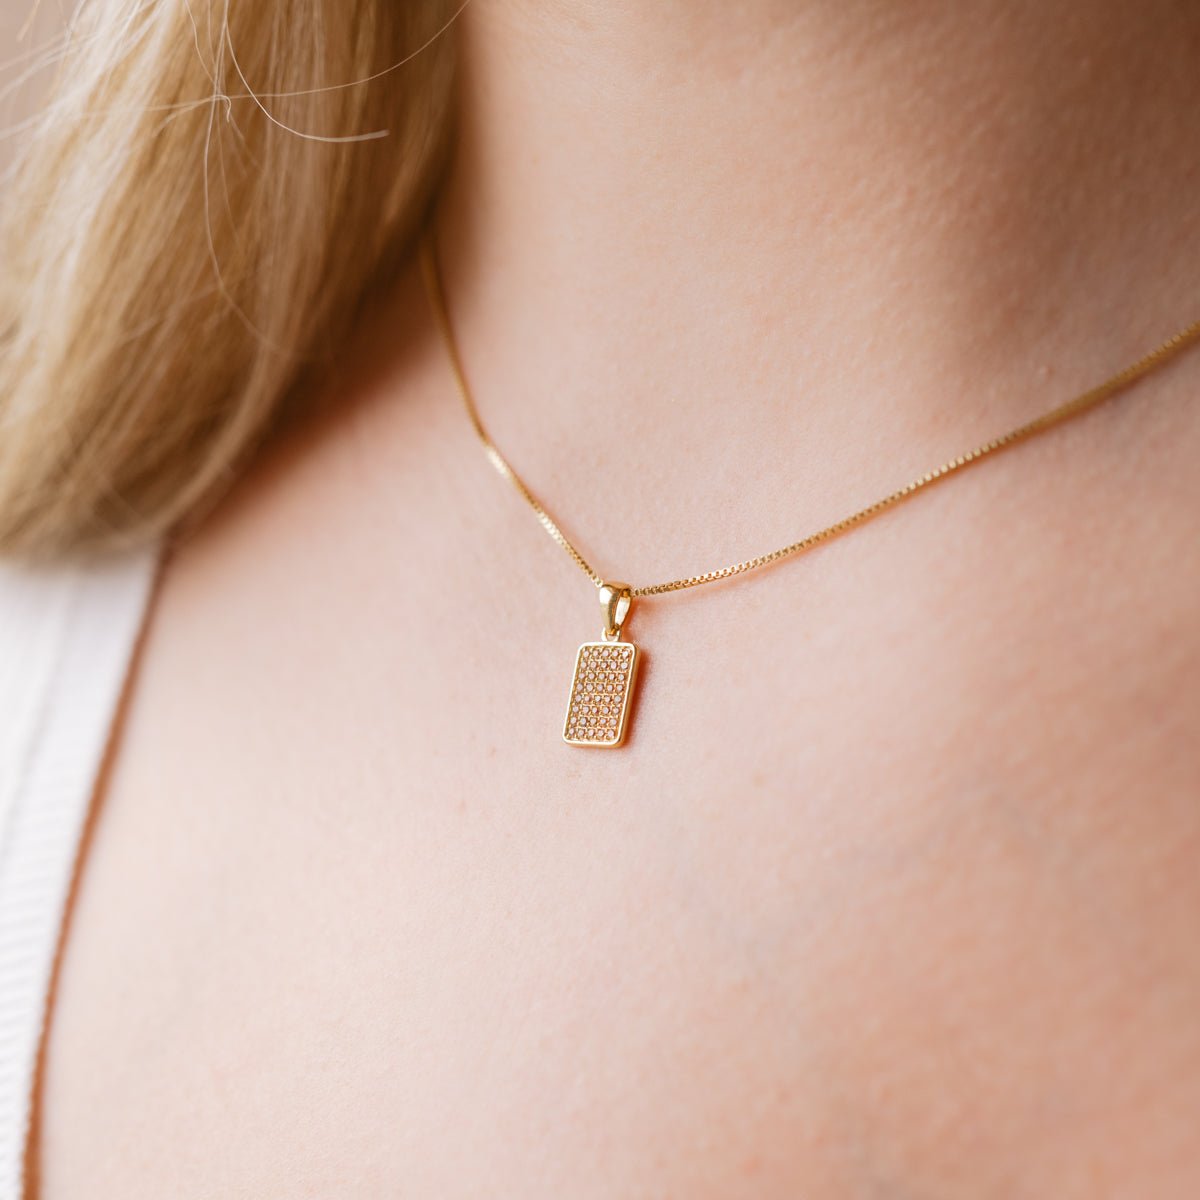 LOVE DAINTY DOG TAG NECKLACE - PEACH CUBIC ZIRCONIA &amp; GOLD - SO PRETTY CARA COTTER